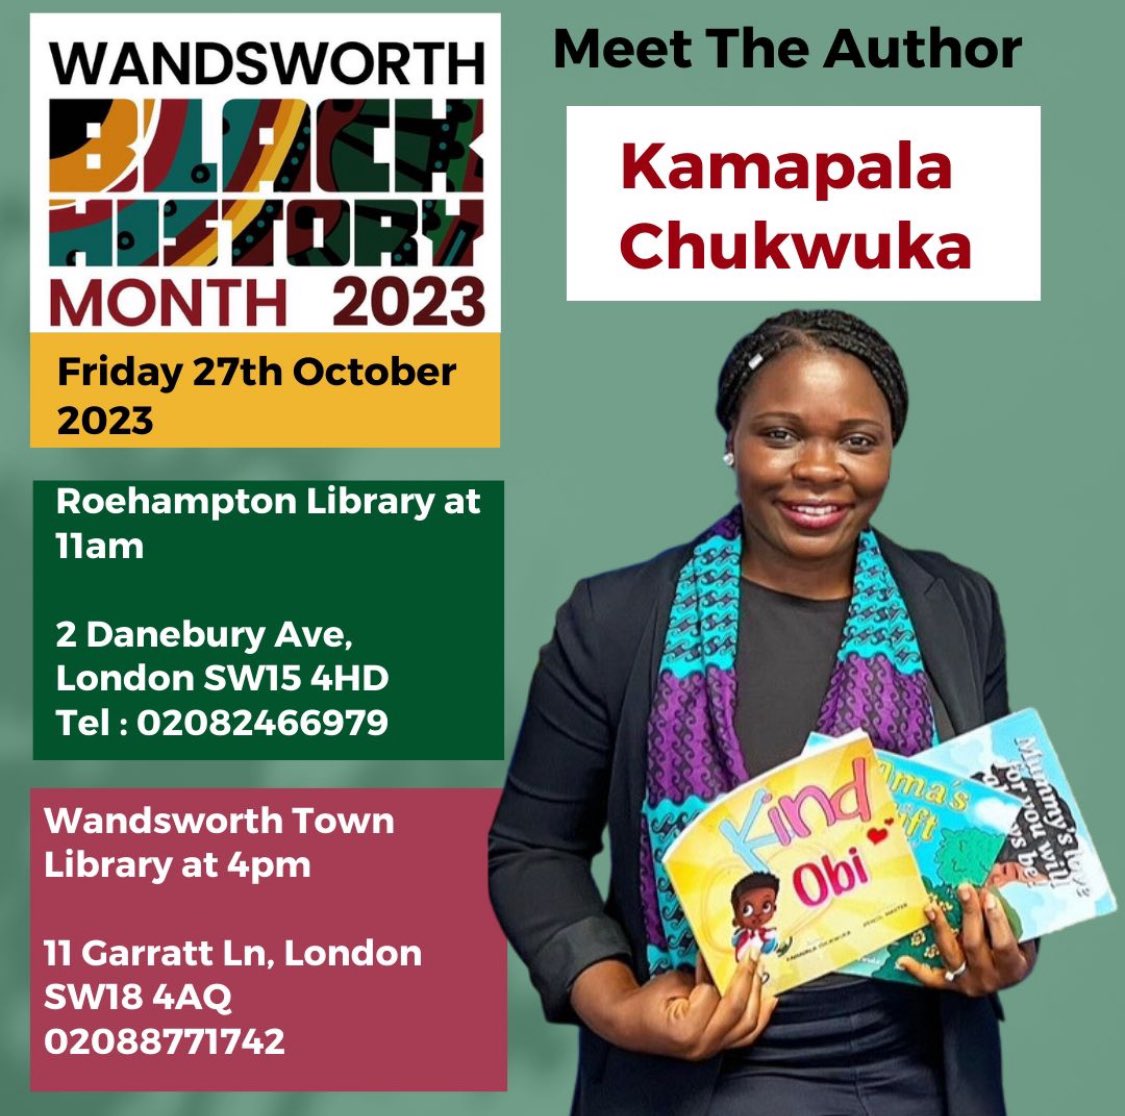 Join @kamapala_C this morning from 11am @RoehamptonL for stories and craft as part of #BlackHistoryMonth